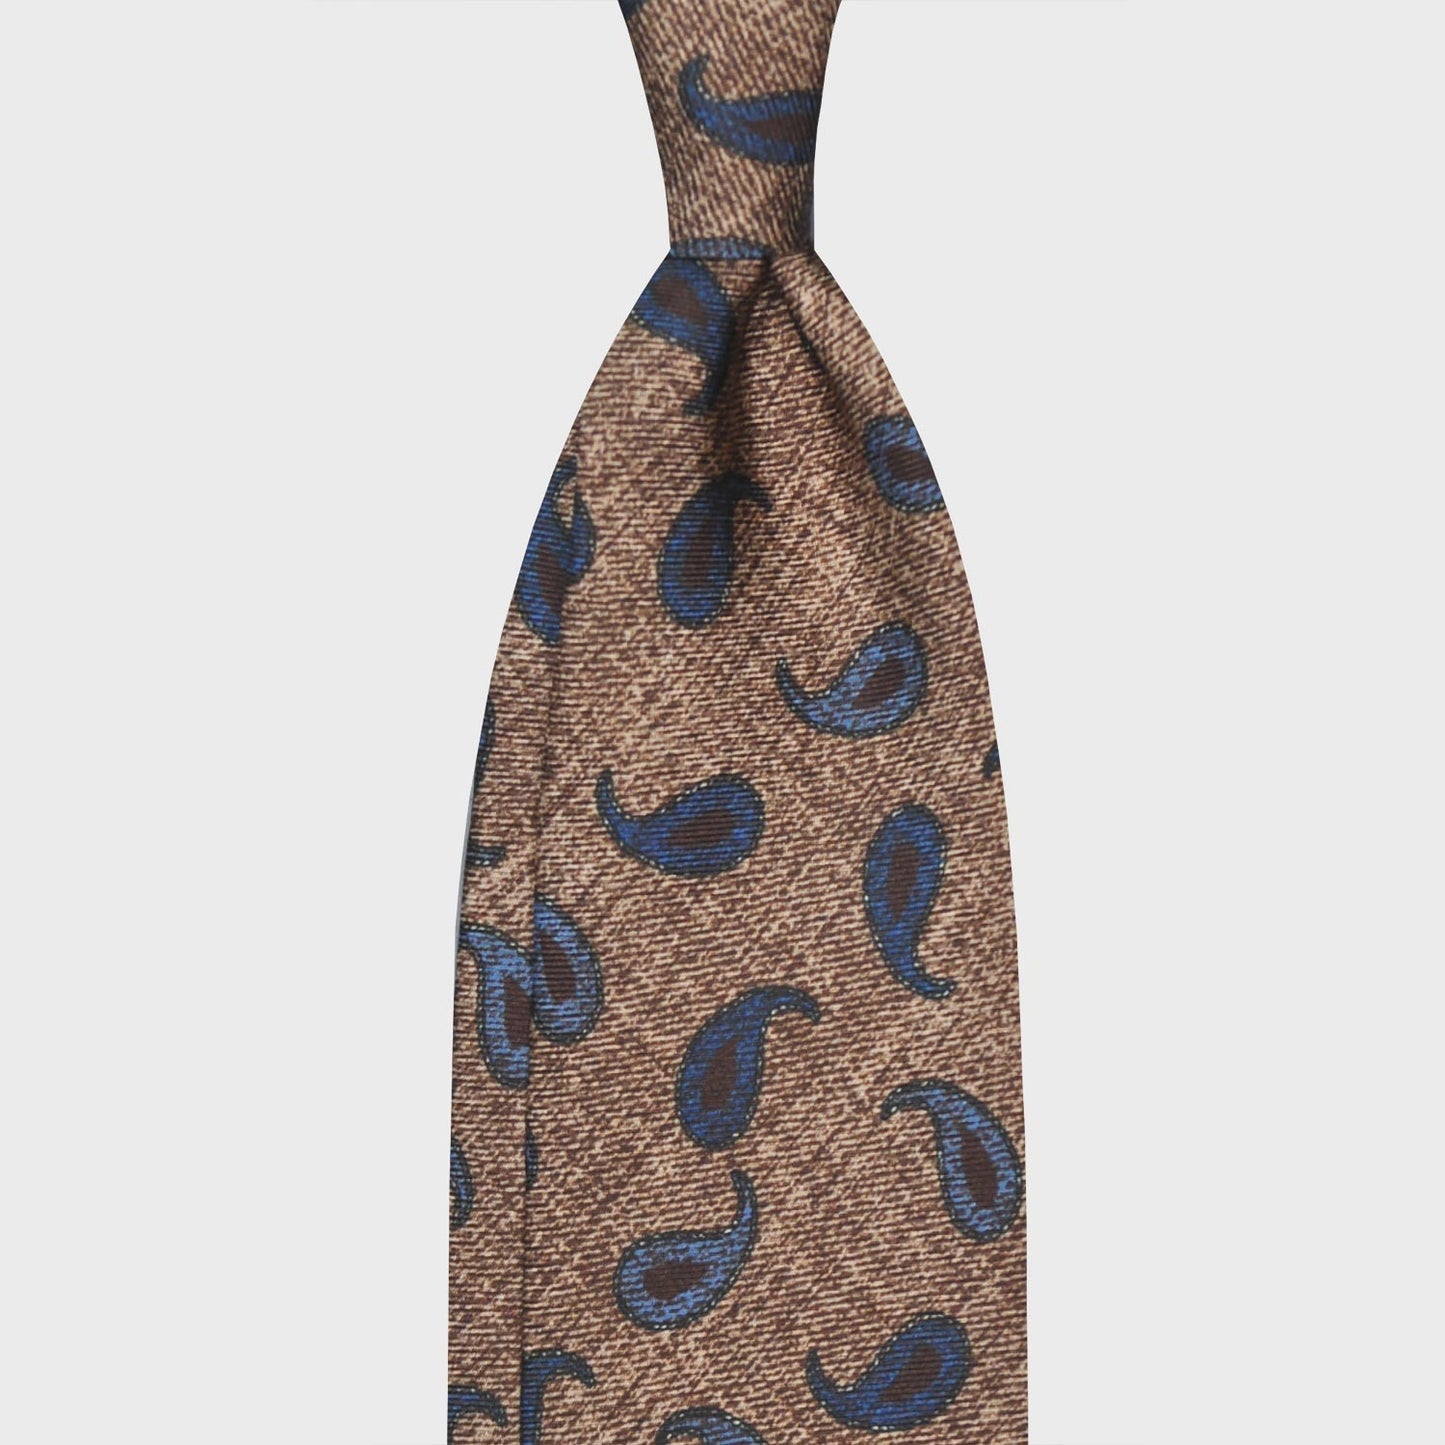 F.Marino Flamed Silk Tie 3 Folds Paisley Coffee Brown. Exclusive silk tie with flamed coffee brown color background, denim blue and brown paisley pattern, unlined 3 folds hand rolled edge, handmade in Italy ties F.Marino Napoli exclusive for Wools Boutique Uomo